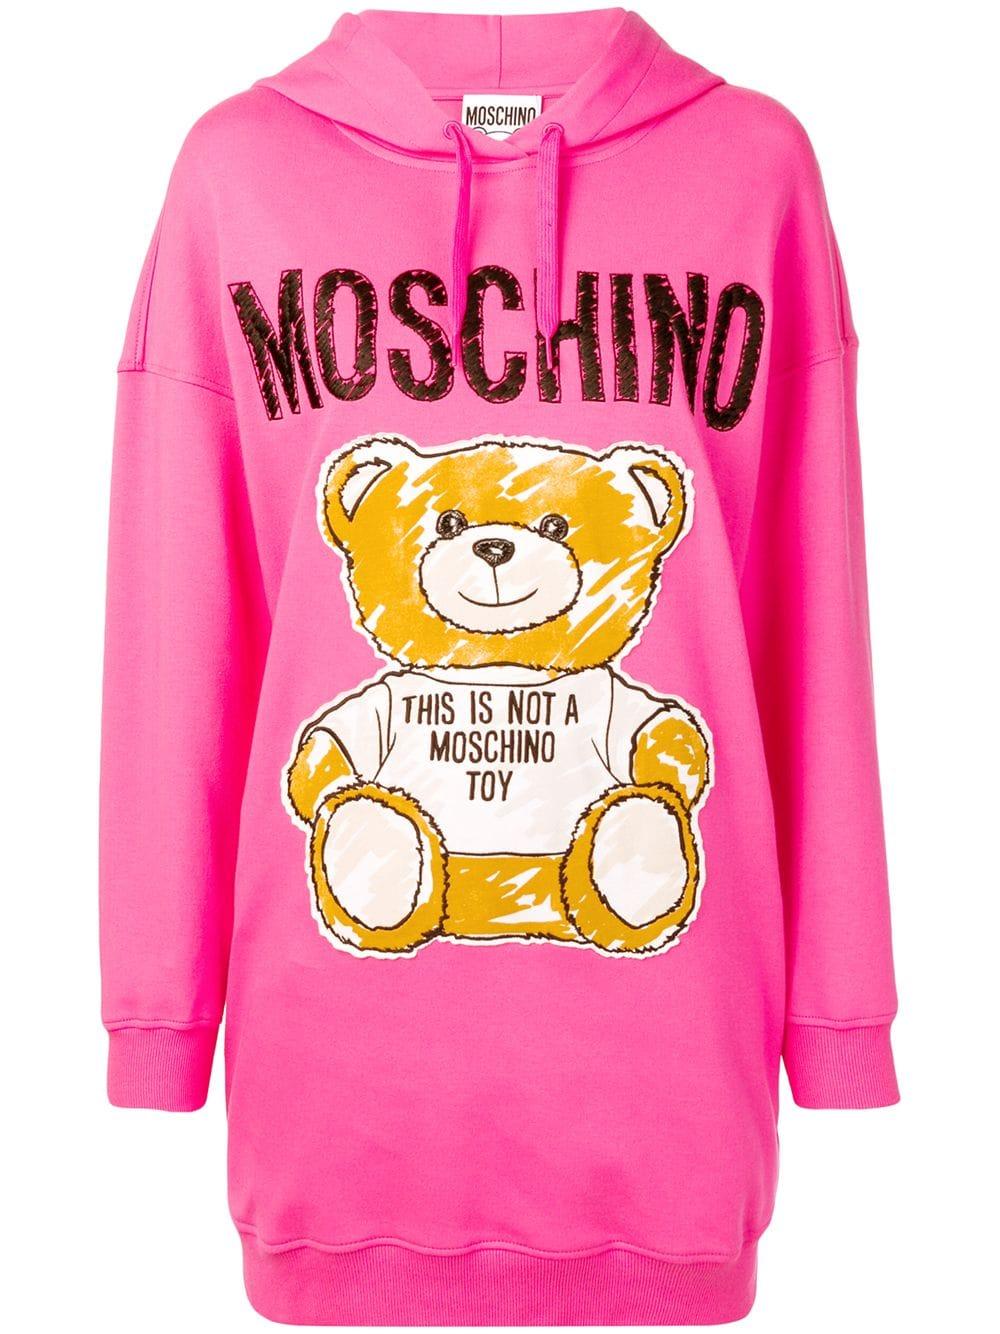 Moschino Cotton Teddy Bear Hooded Dress in Pink - Lyst